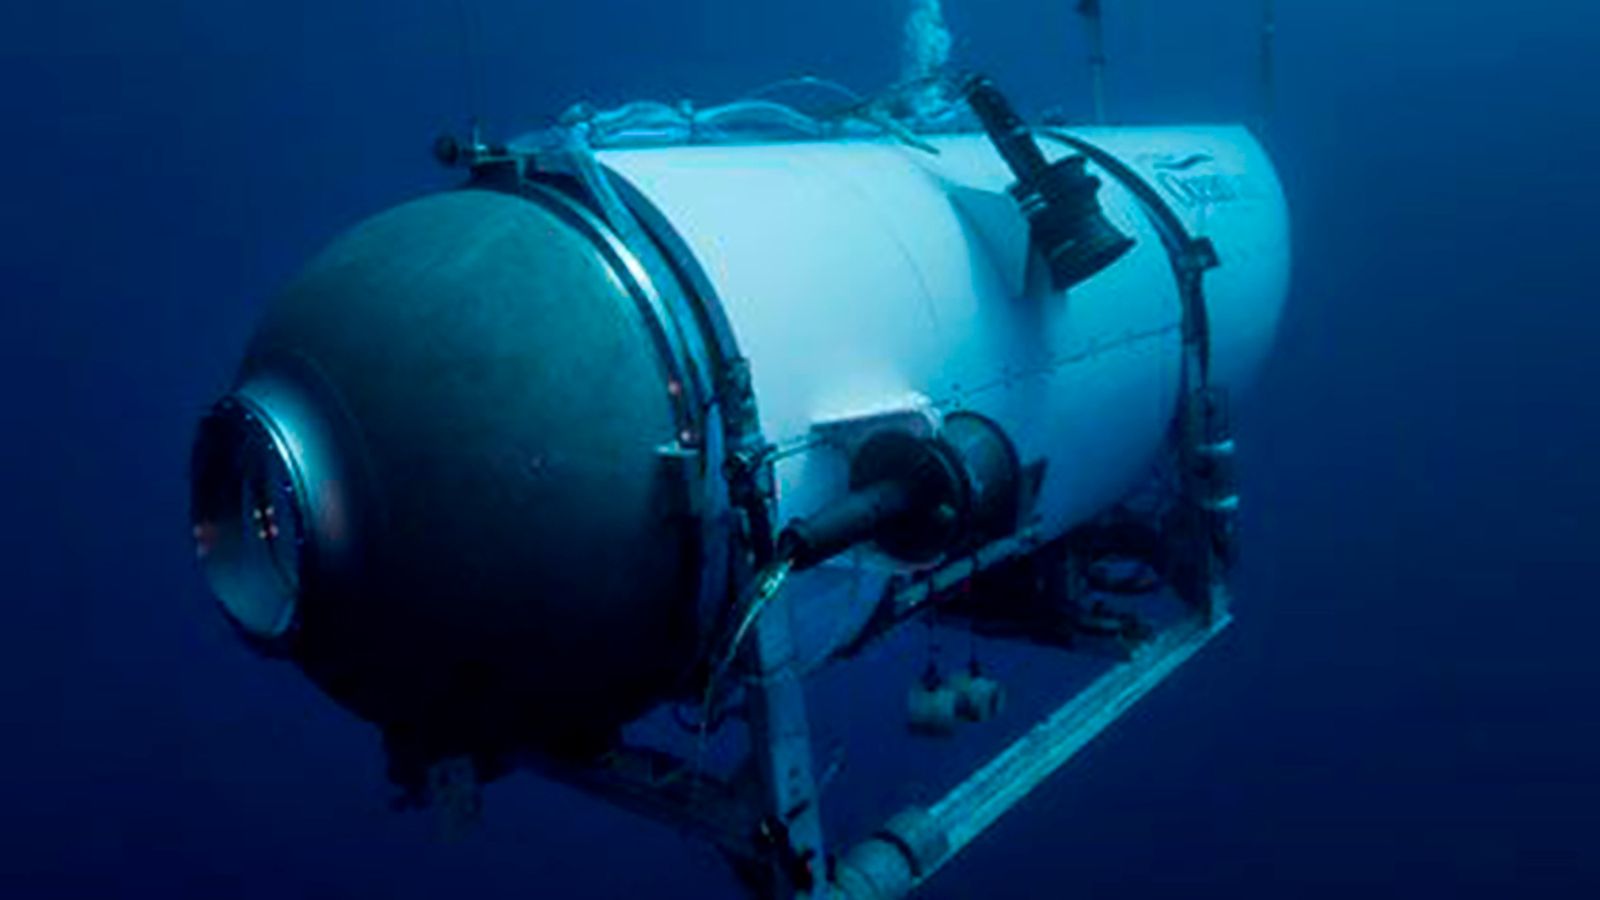 Titan submersible debris found 'shortly after' search vessel arrived on seafloor